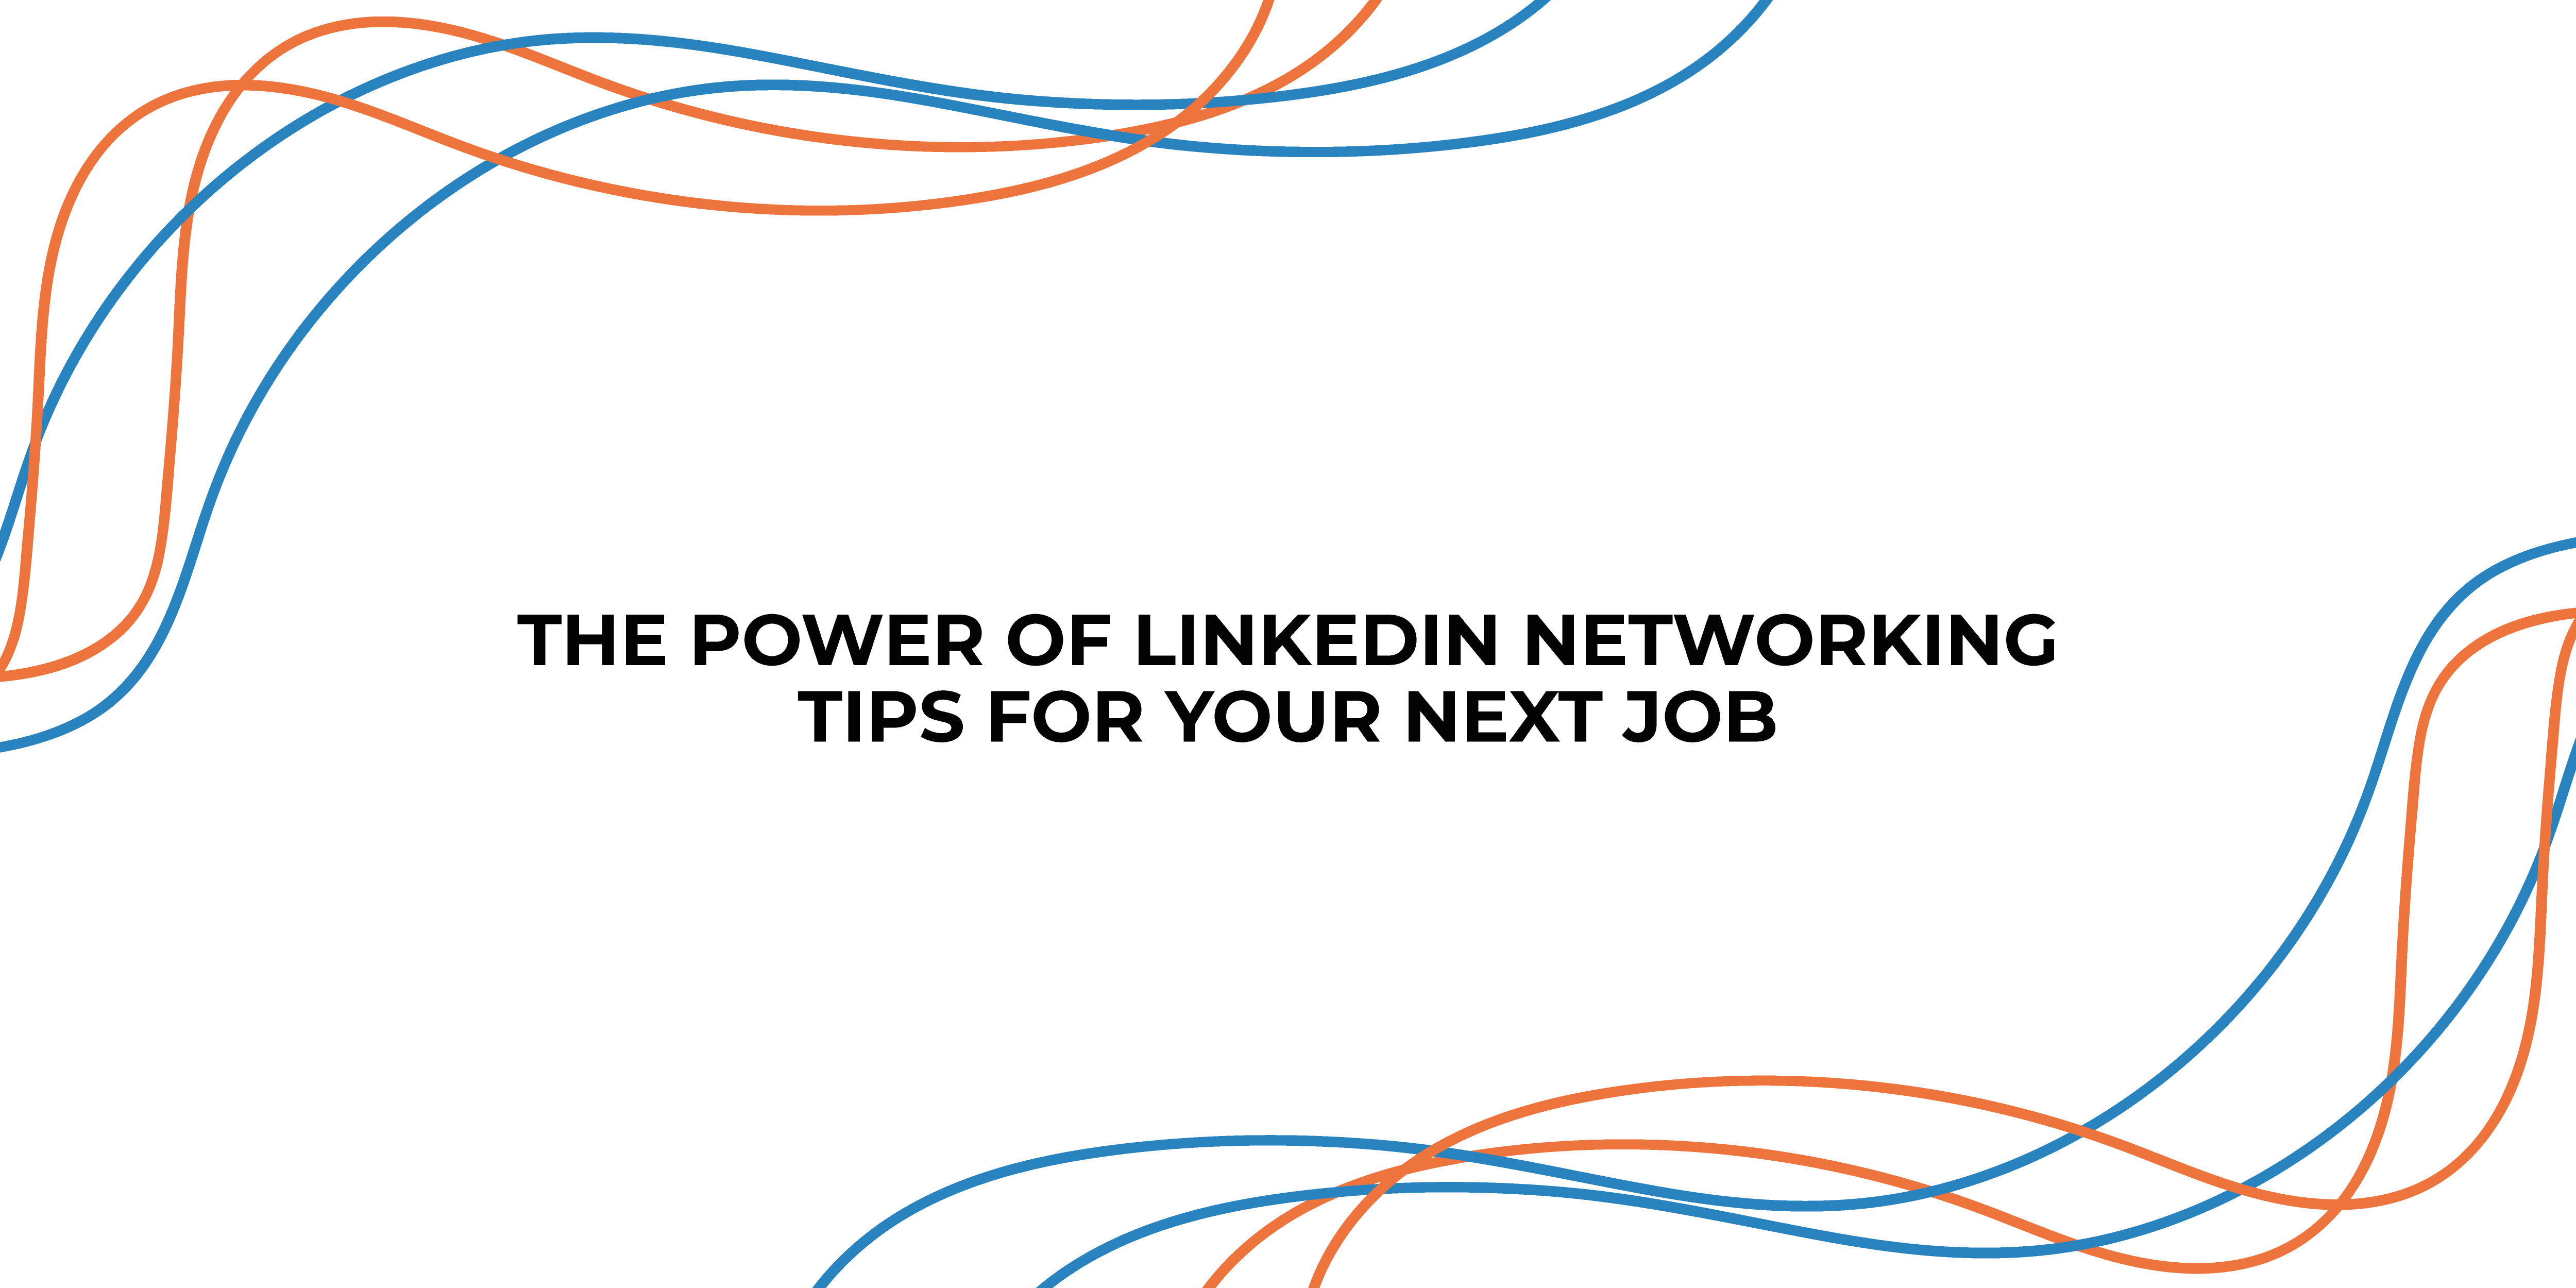 The Power of LinkedIn Networking: Tips for Your Next Job